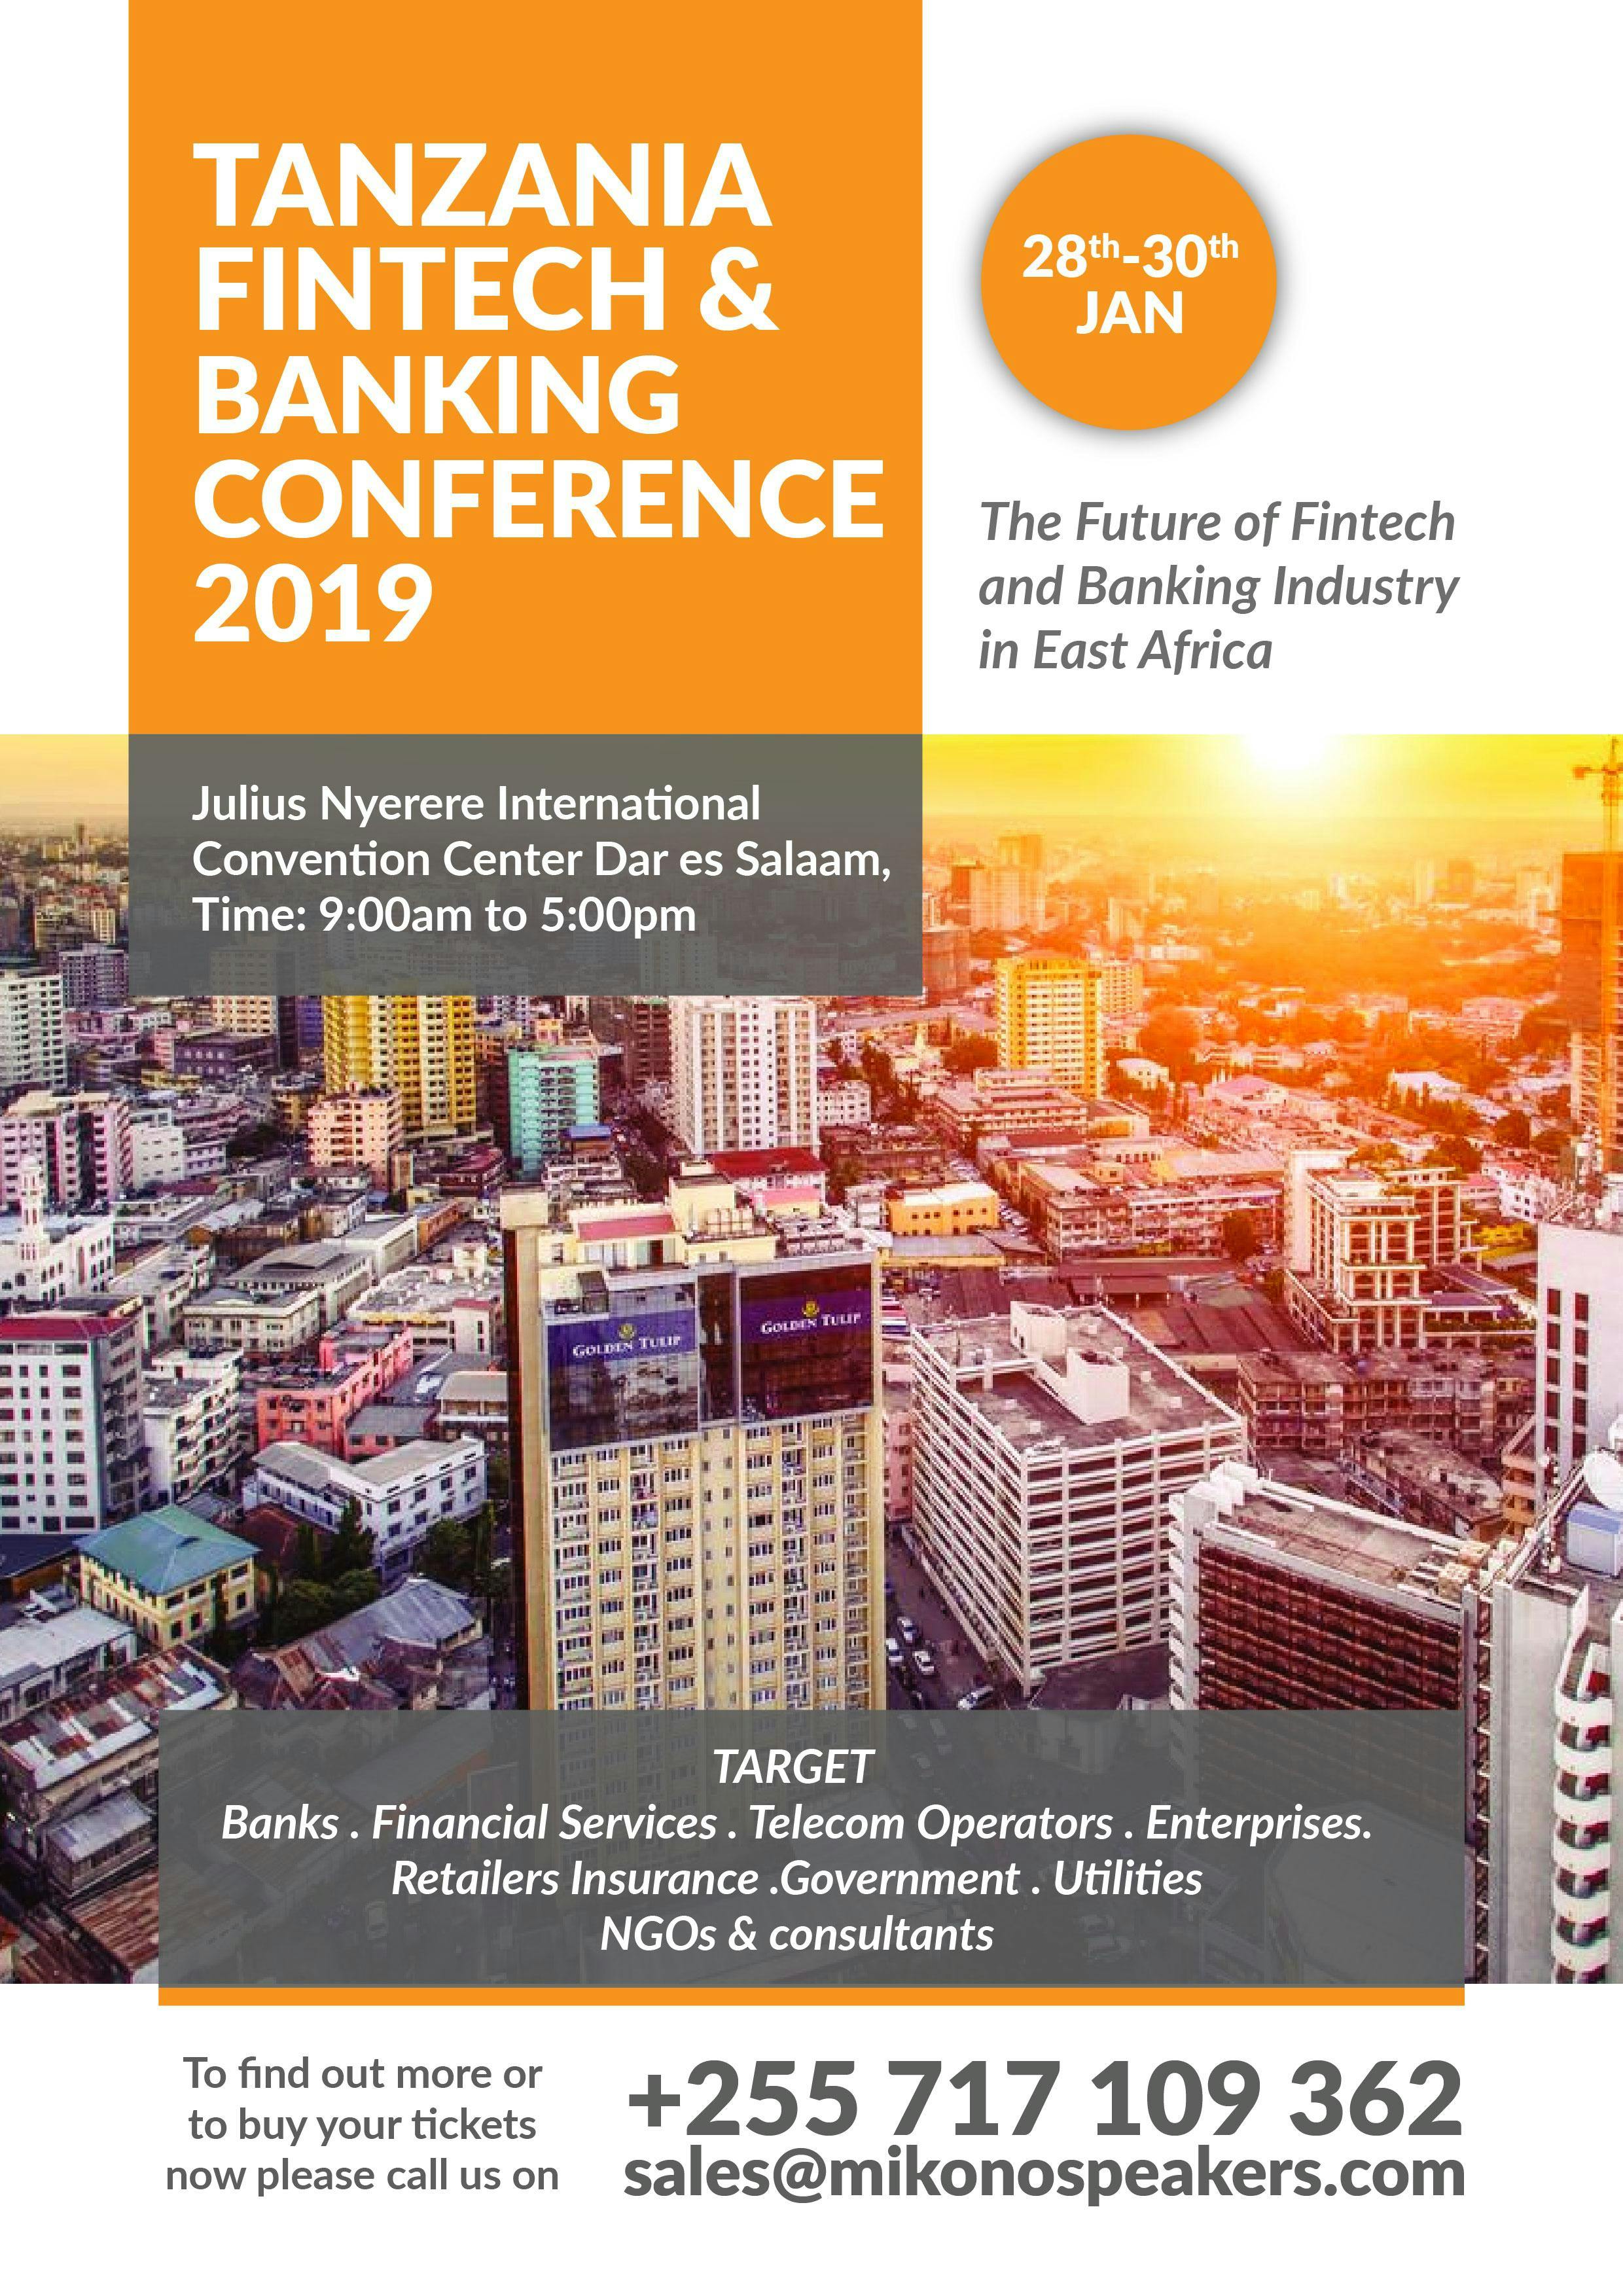 Tanzania Fintech and Banking Conference 2019